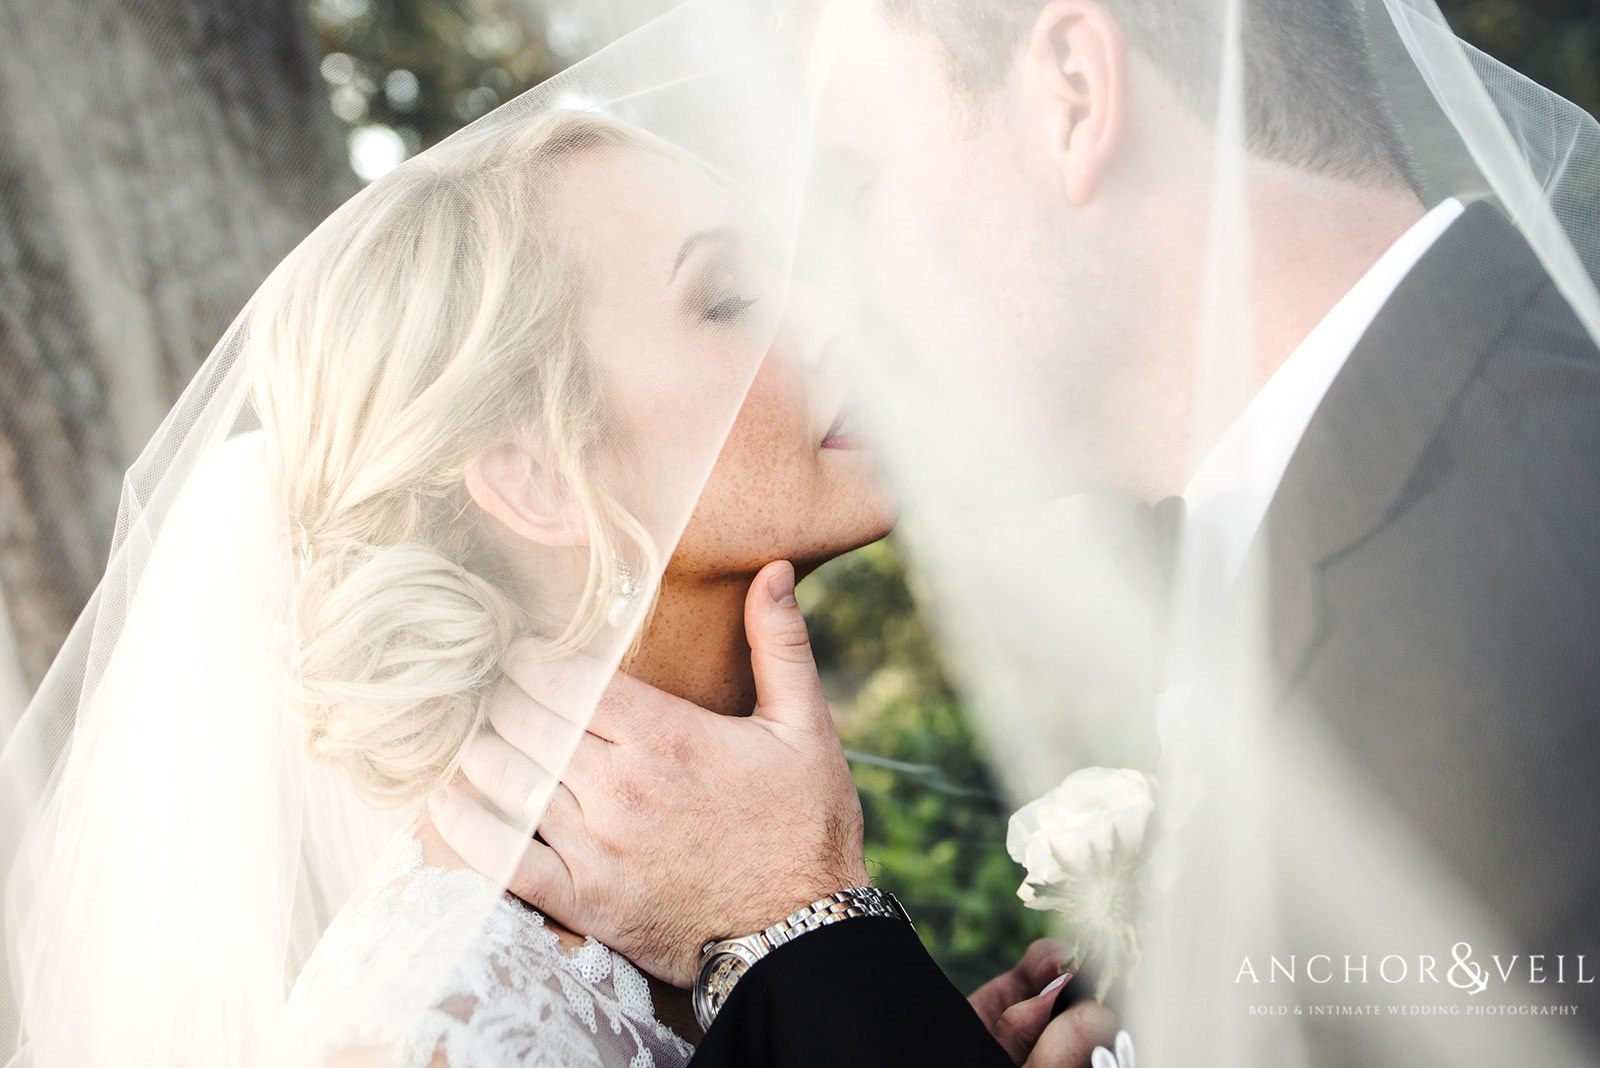 The bridge and groom under the veil at the Lowndes Grove Plantation Wedding